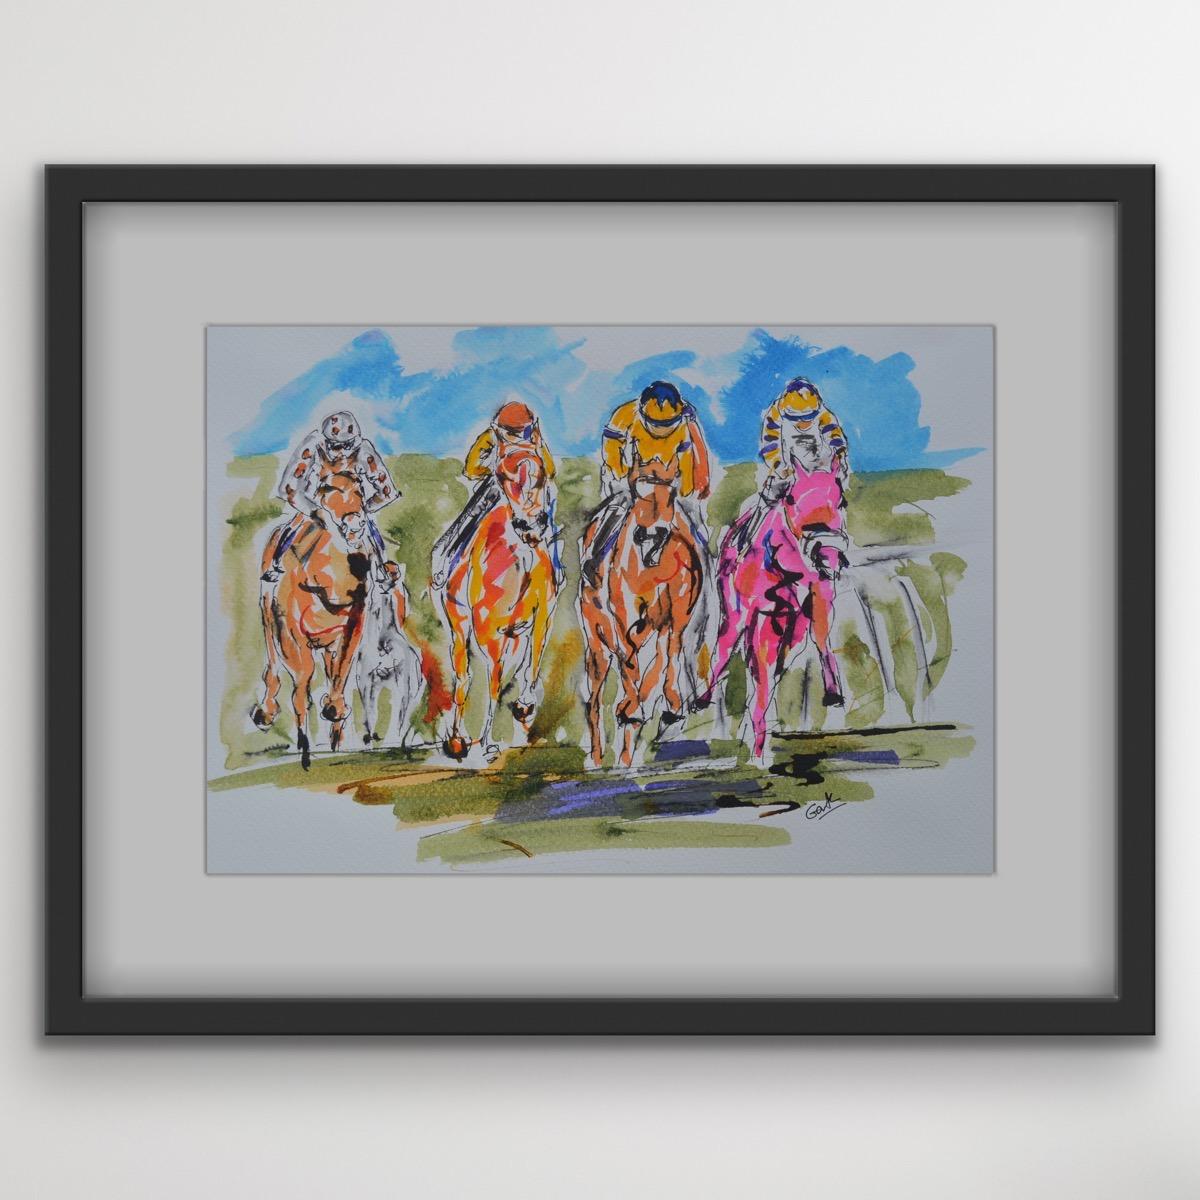 Photo Finish -Horses Racing an original painting by Garth Bayley. Pen and ink Capturing the moment the horses fly past the posts Affordable art.
Discover works by Garth Bayley online and in our Deddington art gallery. 'Capturing the Heart of